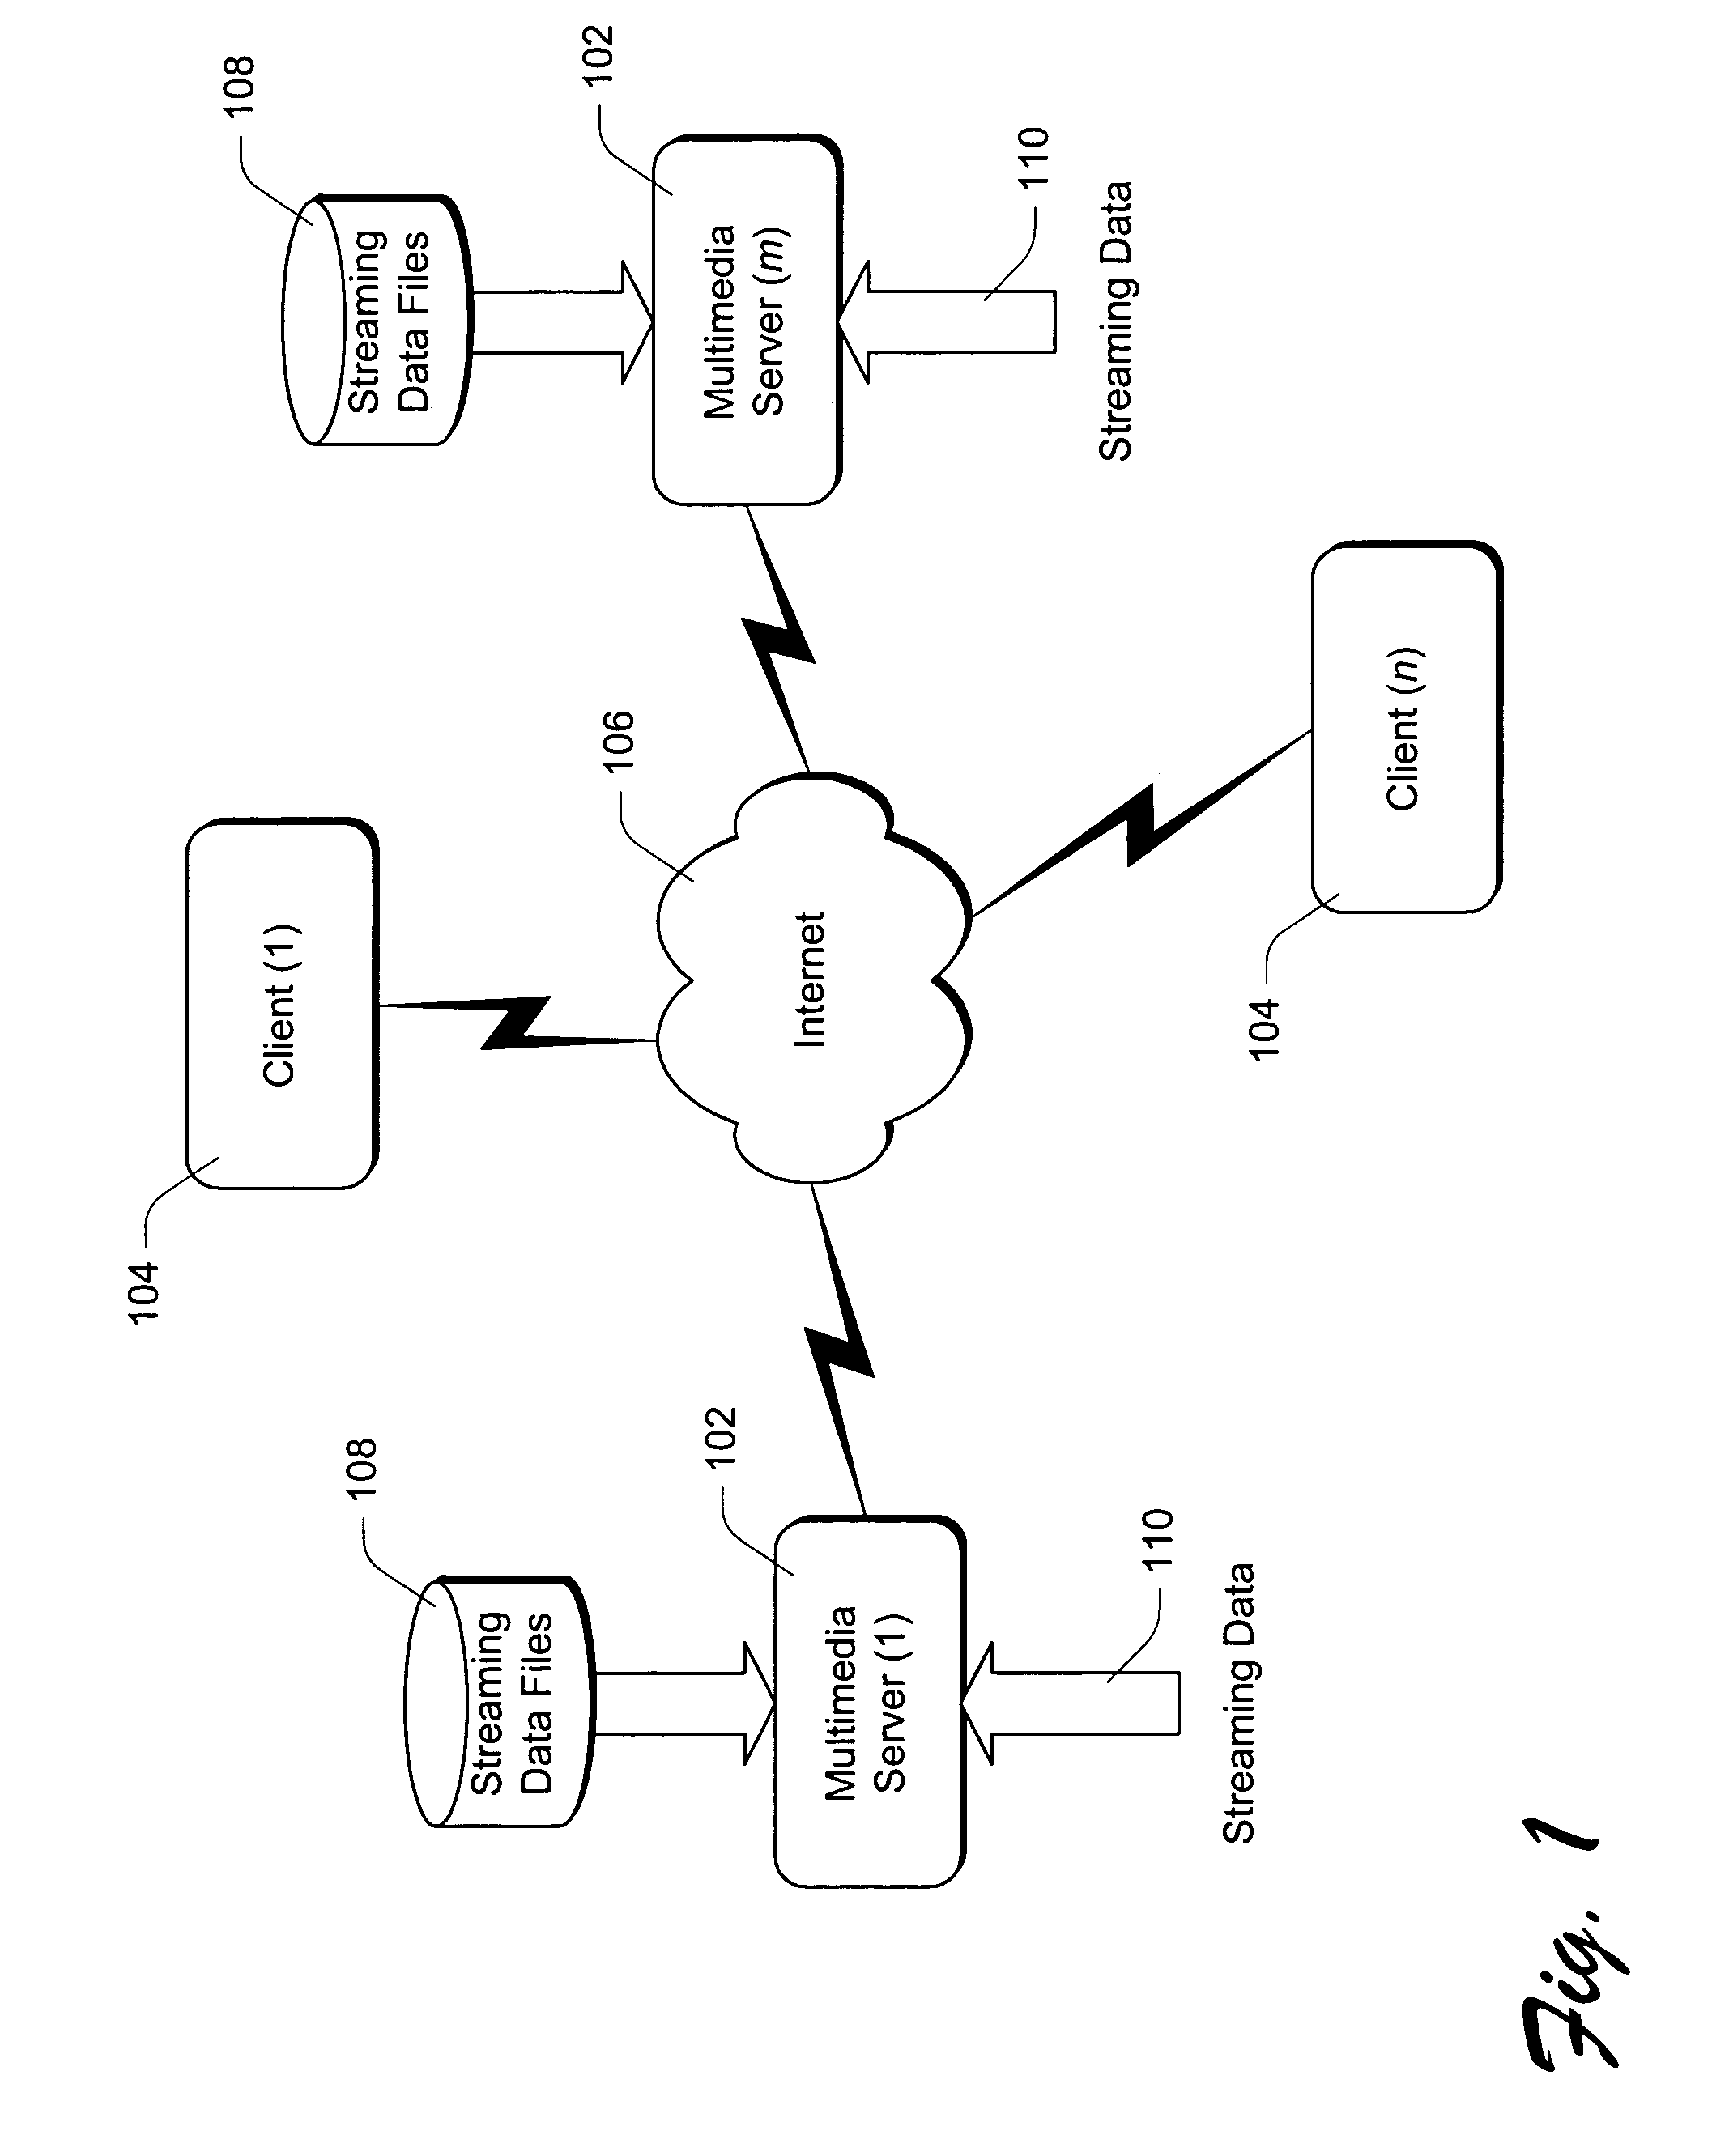 Managing timeline modification and synchronization of multiple media streams in networked client/server systems